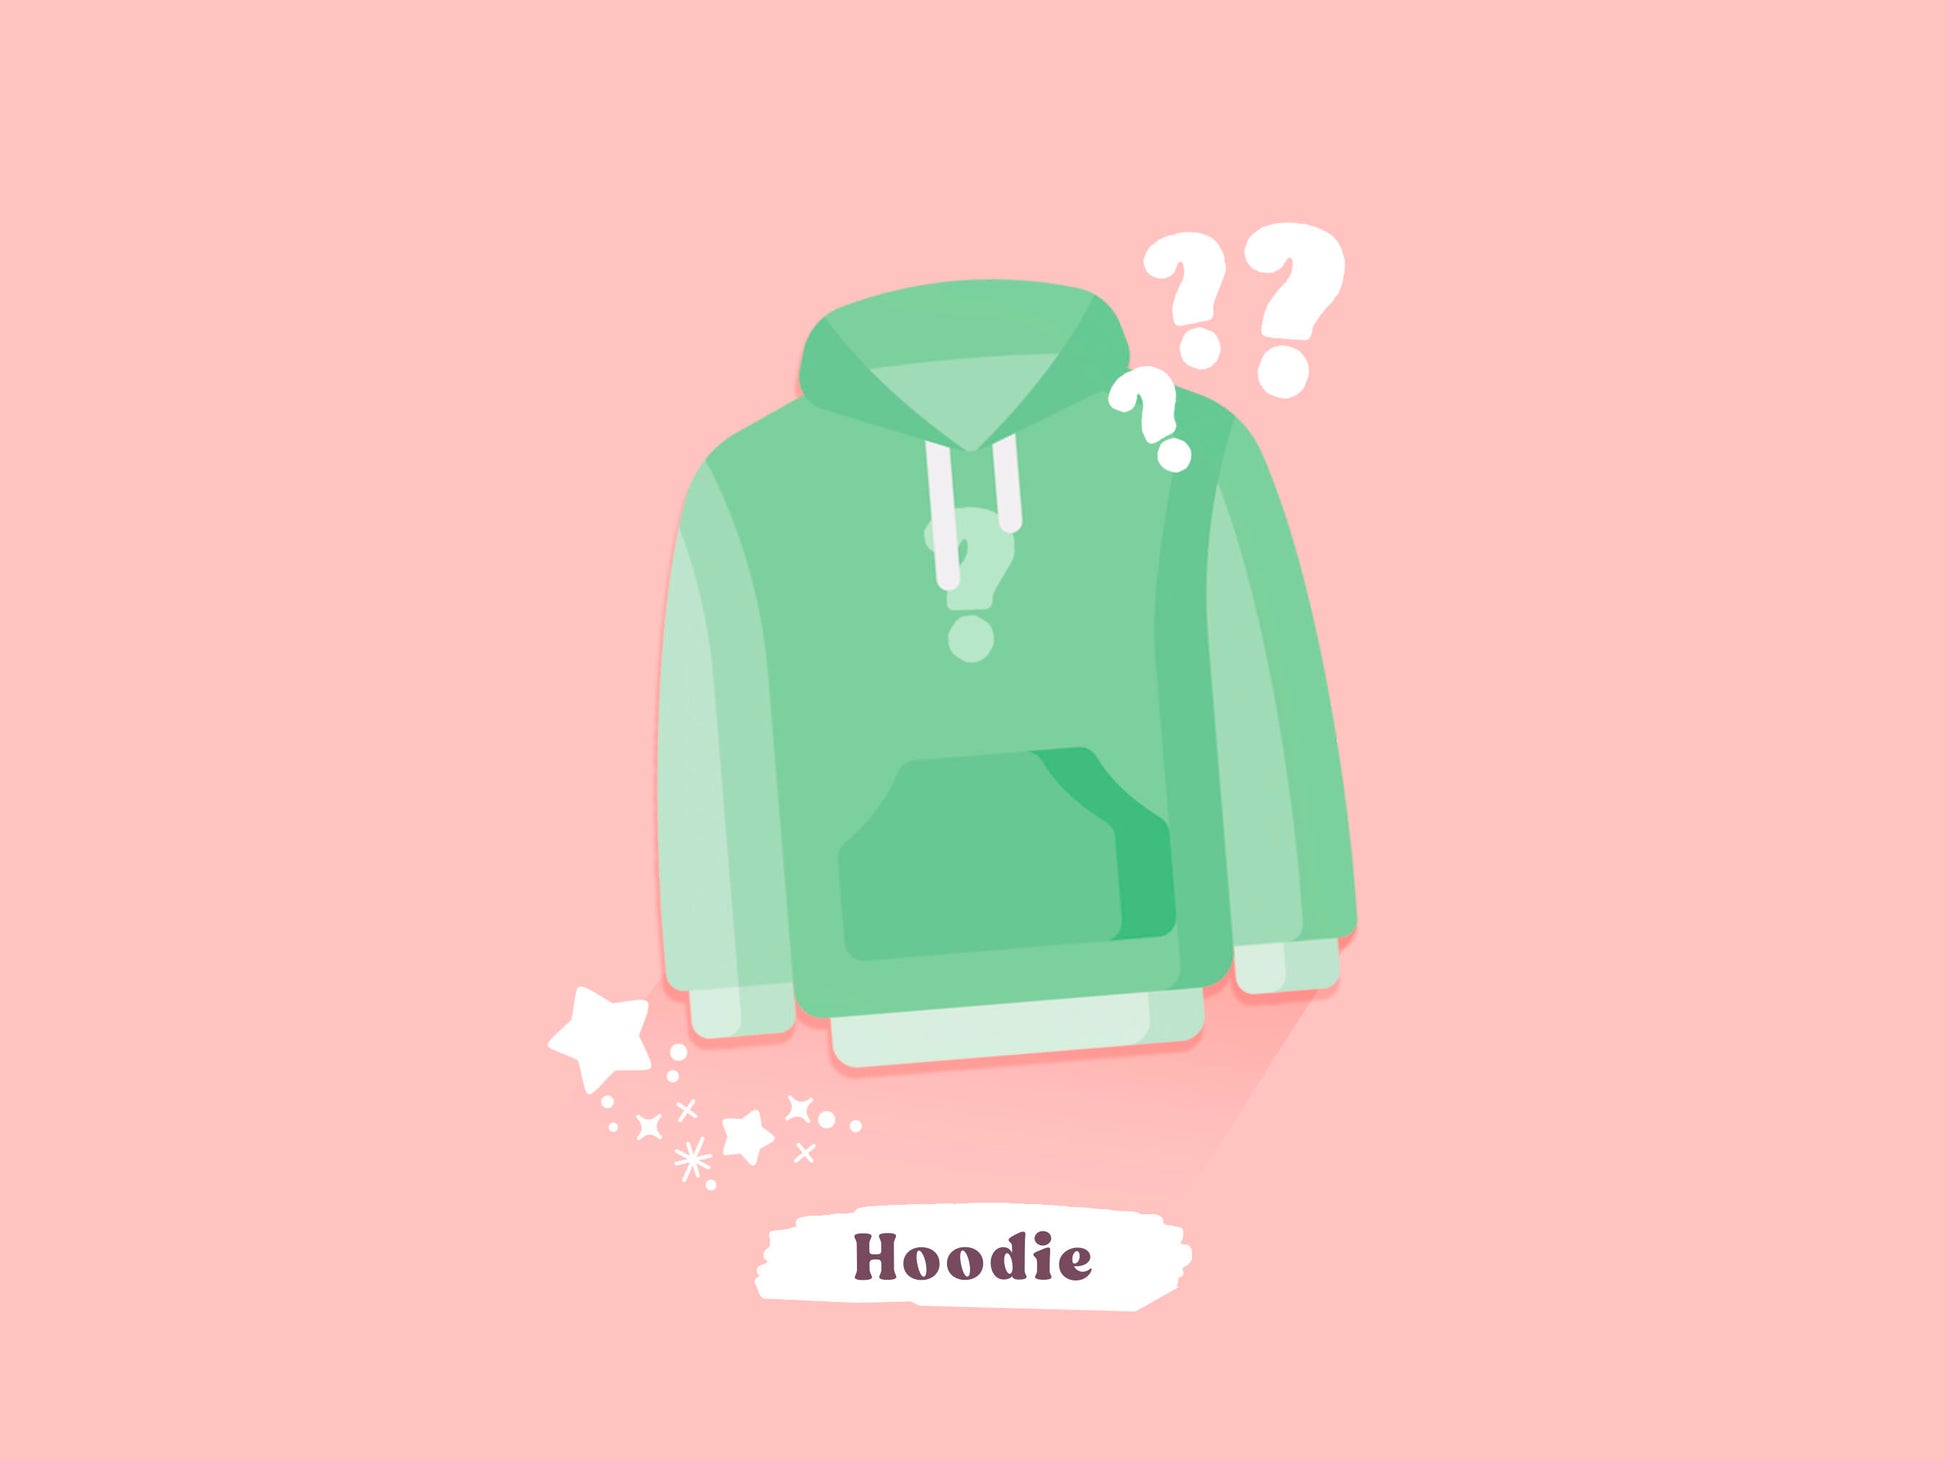 A green hoodie illustration surrounded by question marks and the text Hoodie, mystery clothing random meme themed apparel